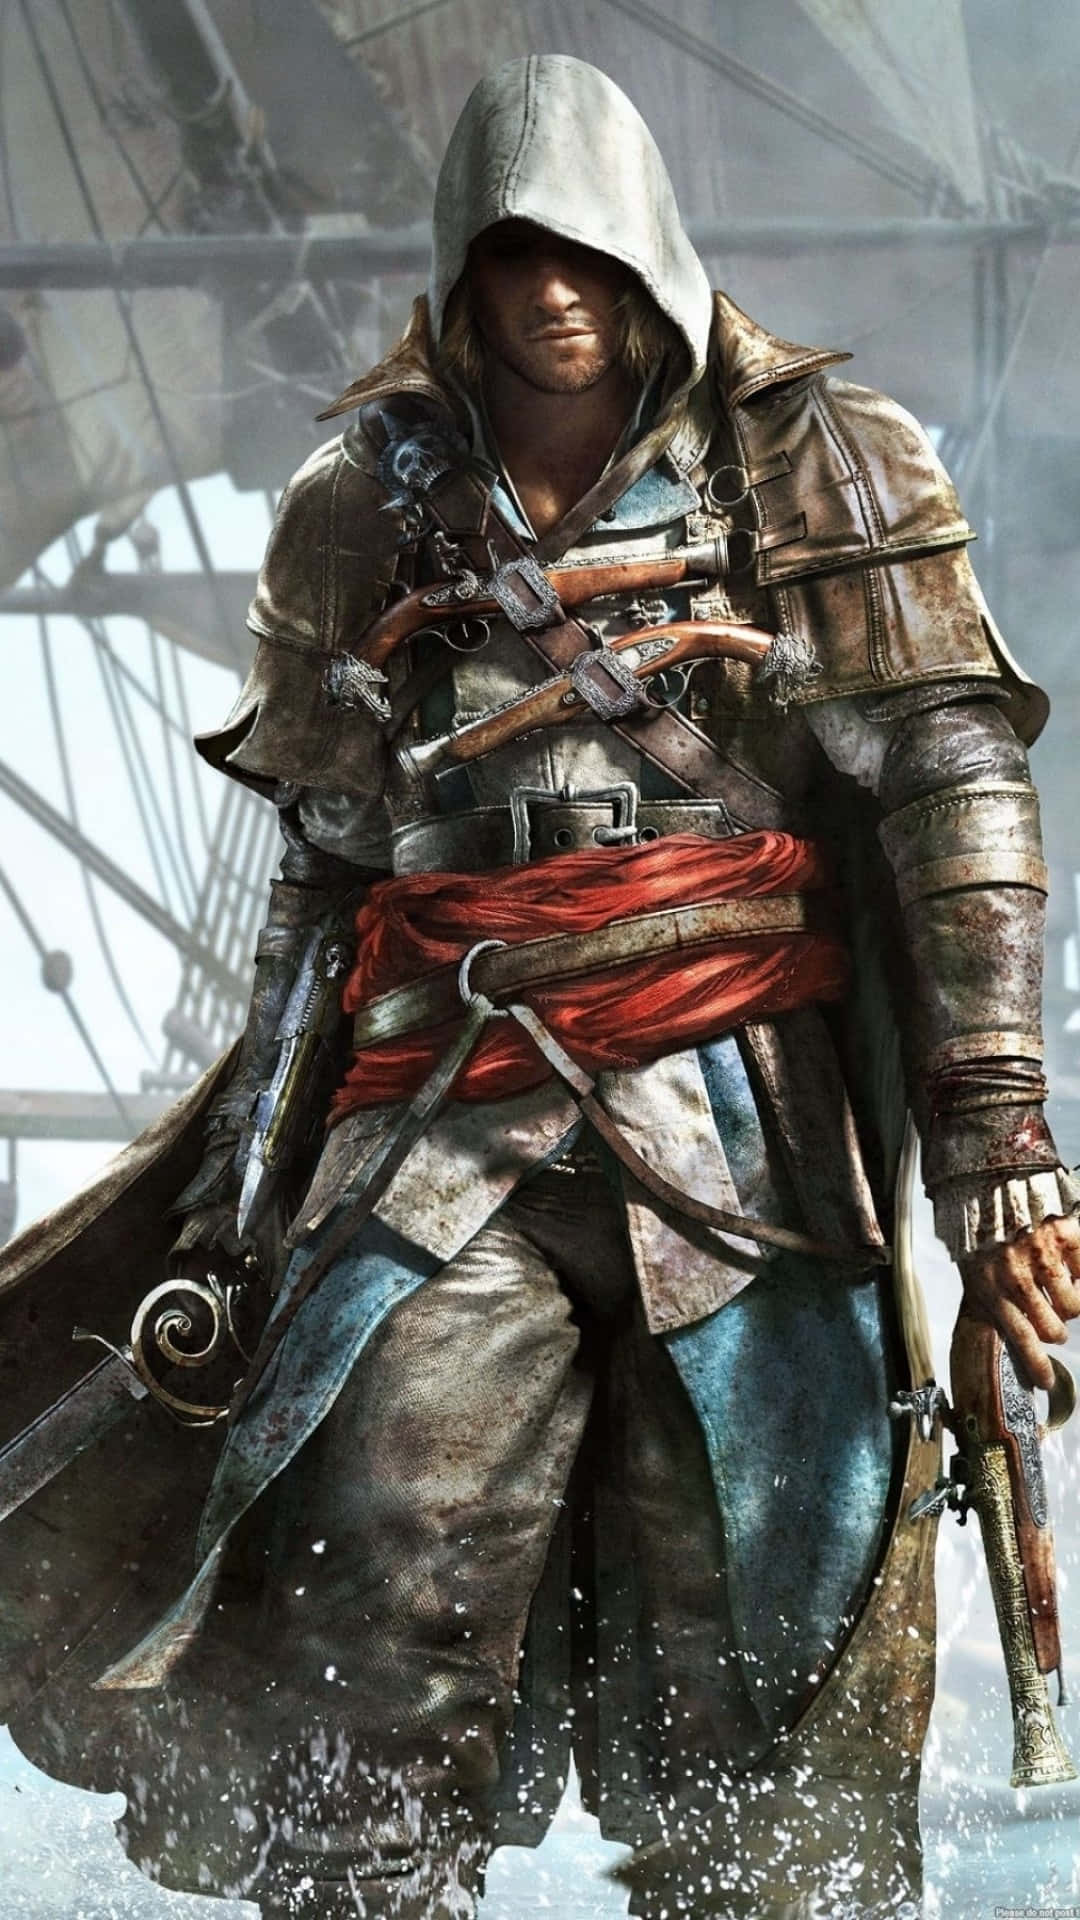 Get Ready To Lead The Assassins With The All-new Iphone Background